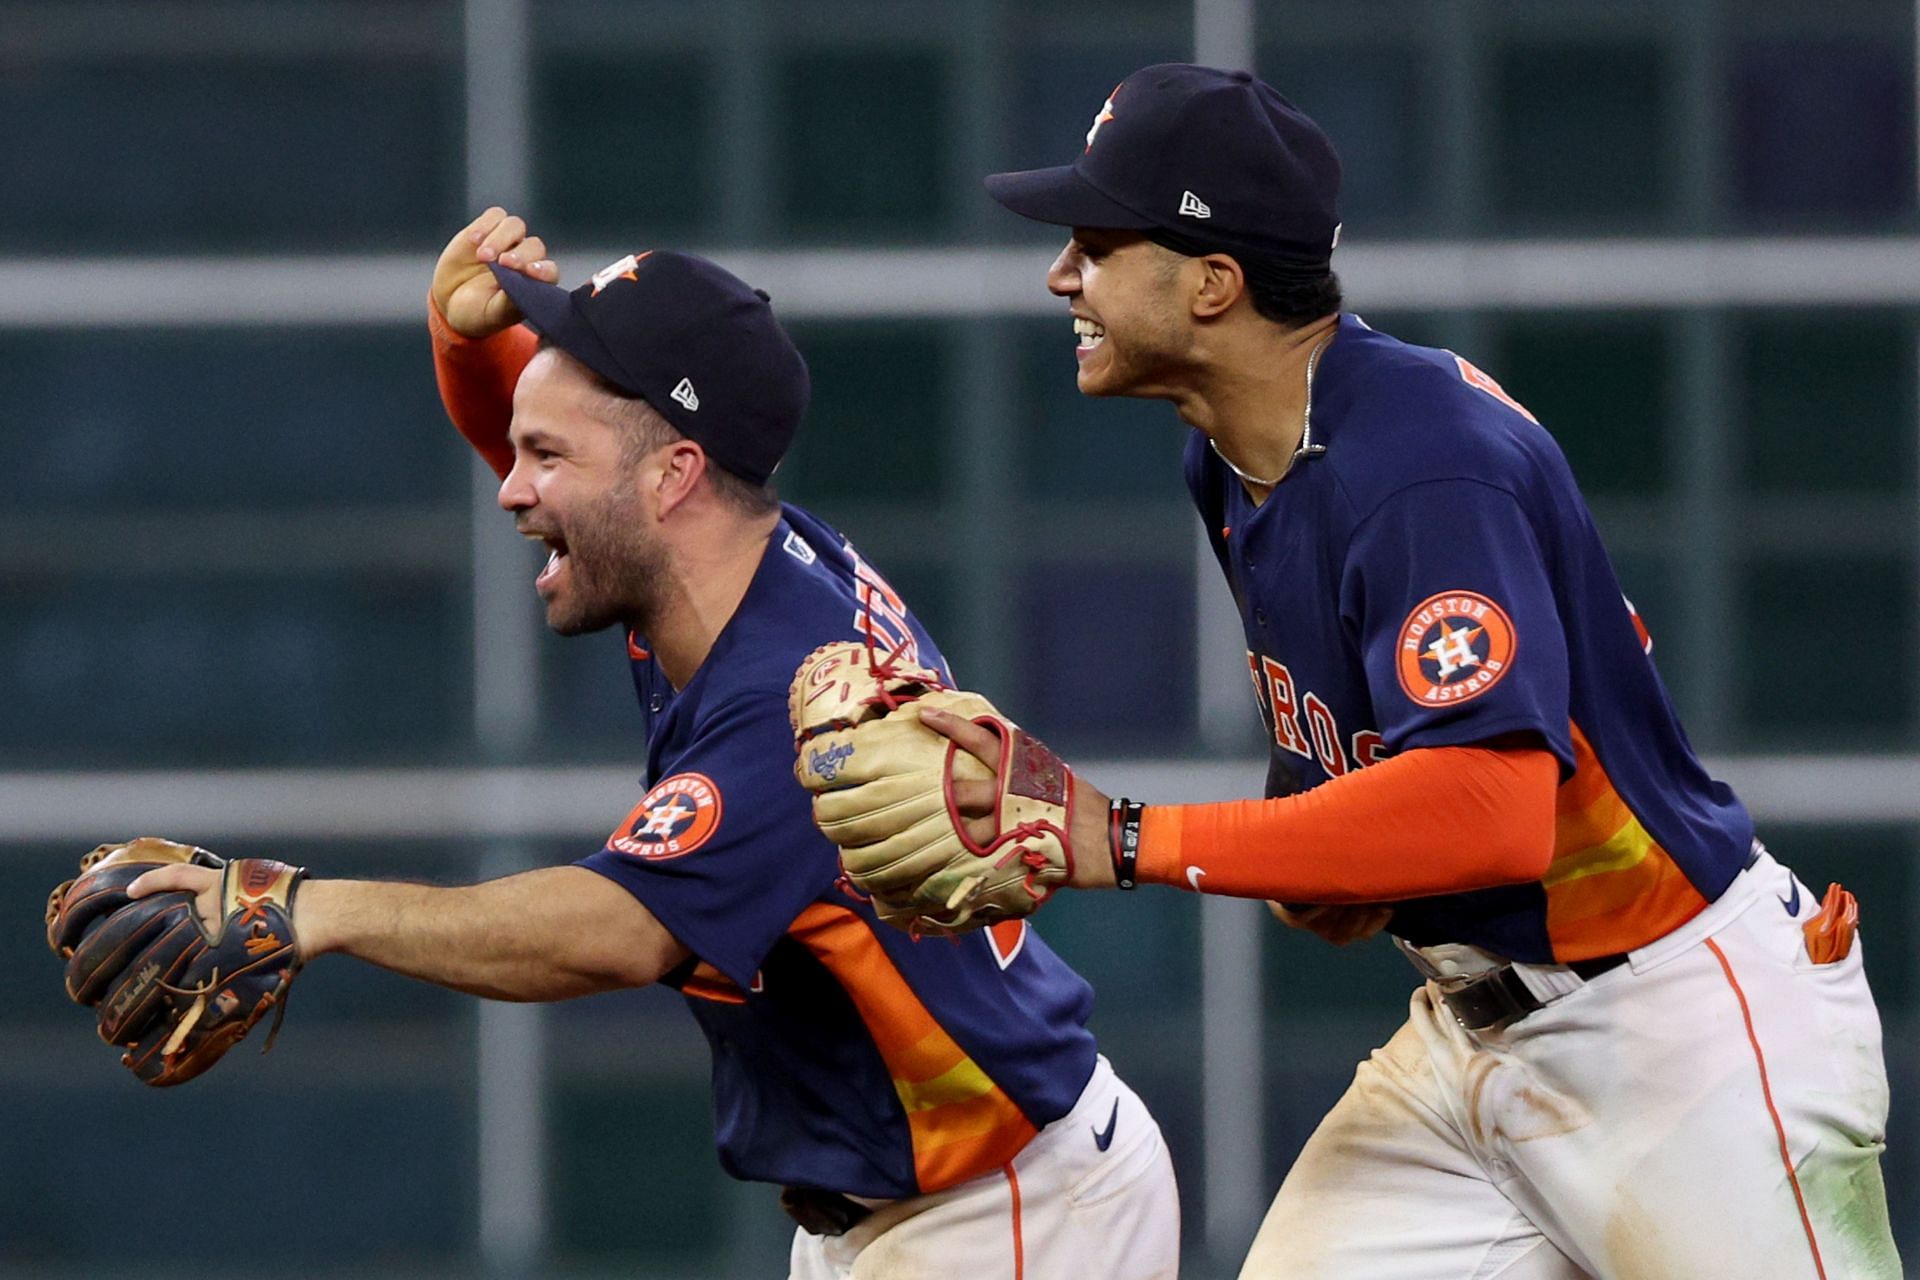 HOUSTON, TEXAS - NOVEMBER 05: Jose Altuve #27 and Jeremy Pena #3 of the Houston Astros celebrate after defeating the Philadelphia Phillies 4-1 to win the 2022 World Series in Game Six of the 2022 World Series at Minute Maid Park on November 05, 2022 in Houston, Texas. (Photo by Harry How/Getty Images)